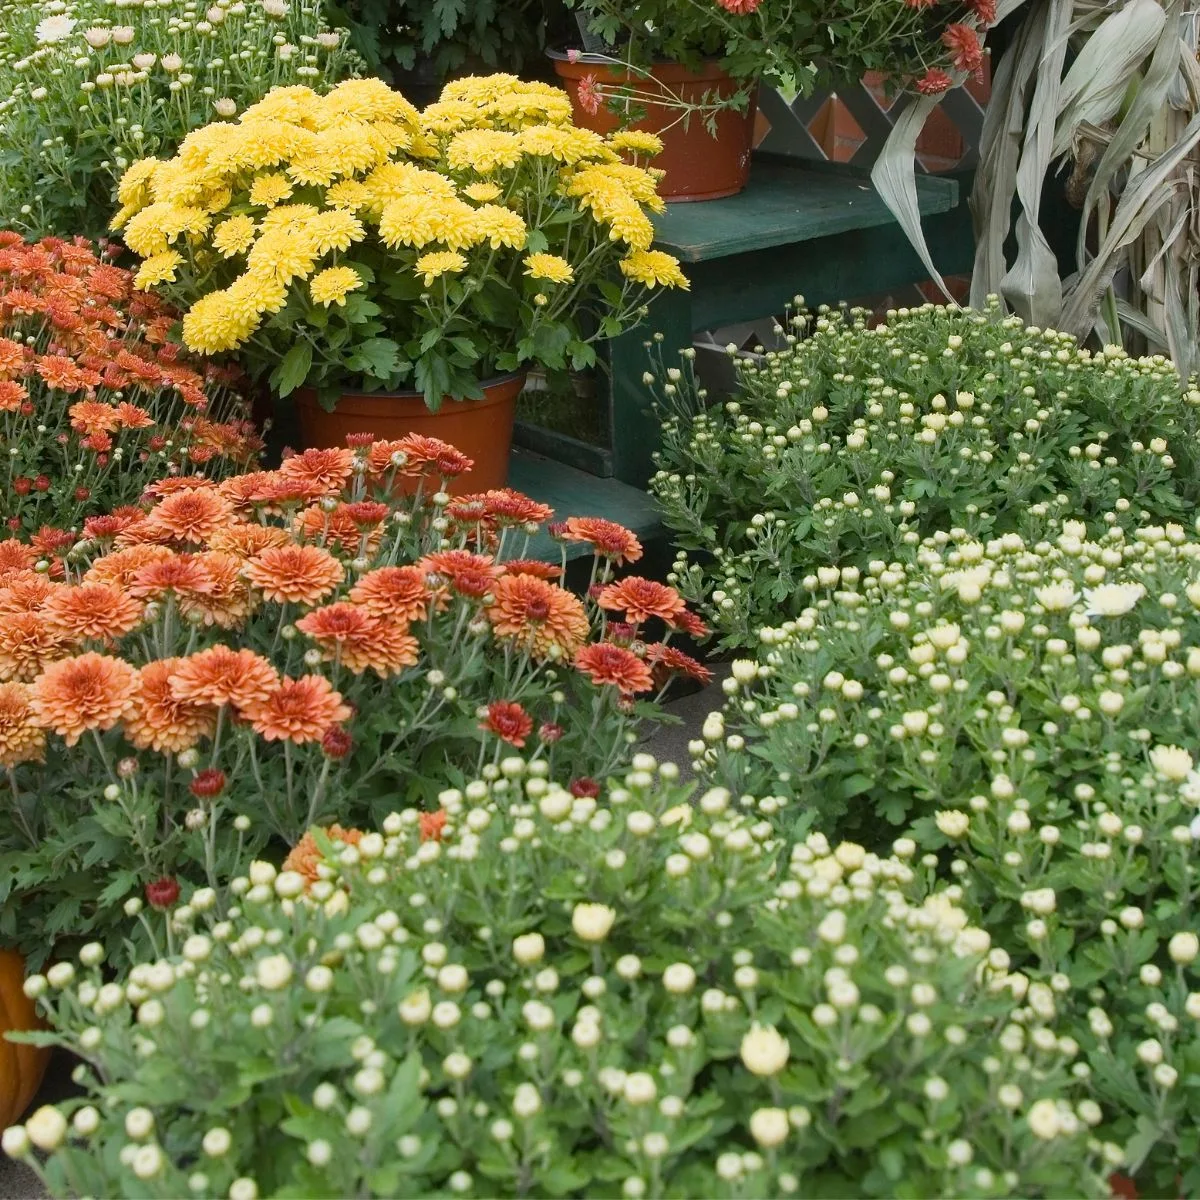 Lots of mums in differnt colors: cream, yellow, and burgundy. 